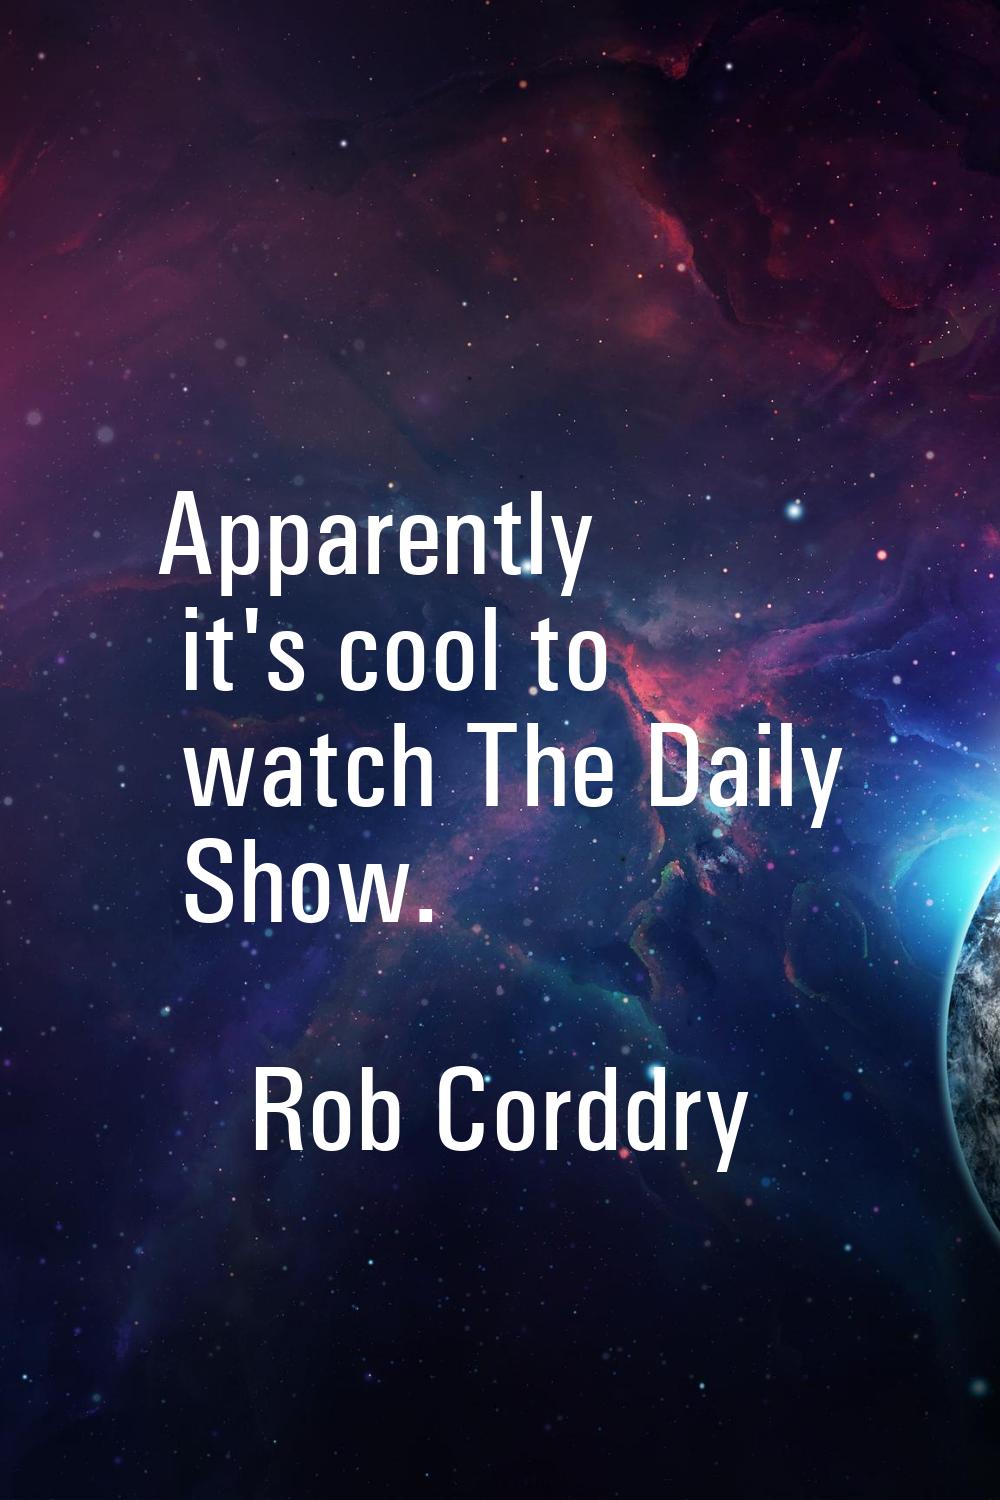 Apparently it's cool to watch The Daily Show.